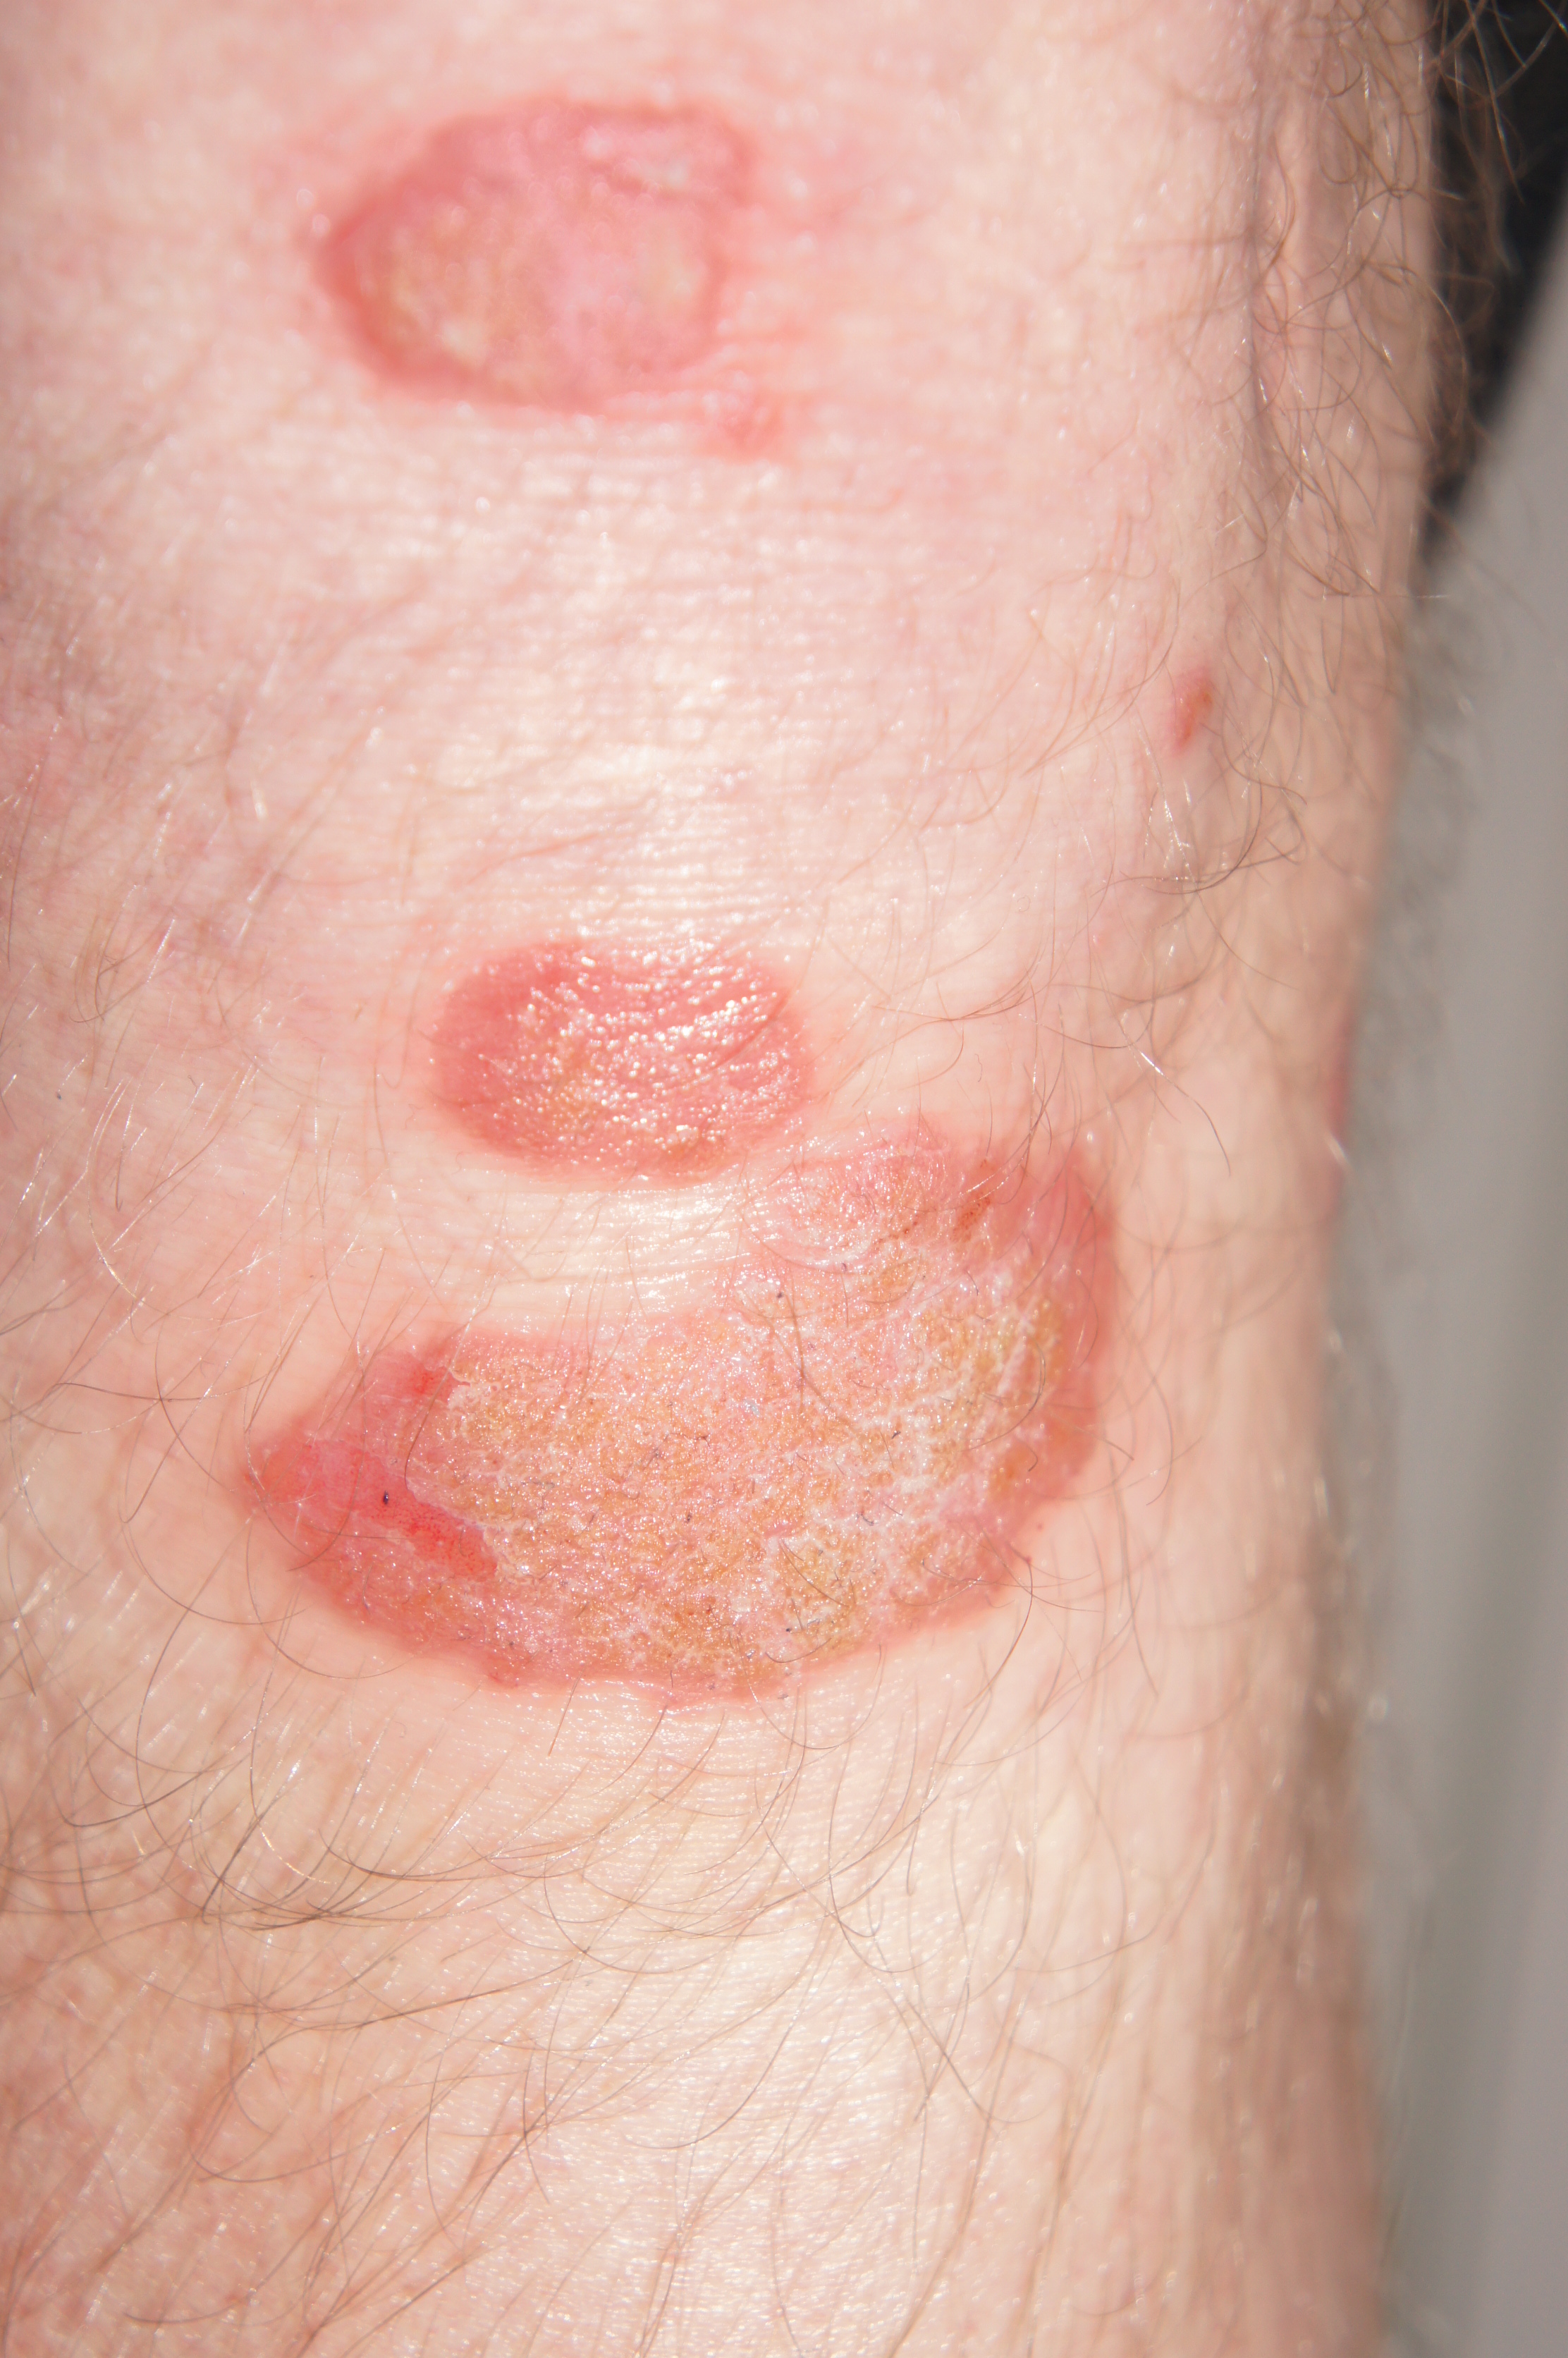 Psoriasis Pictures View Free Images of Psoriasis